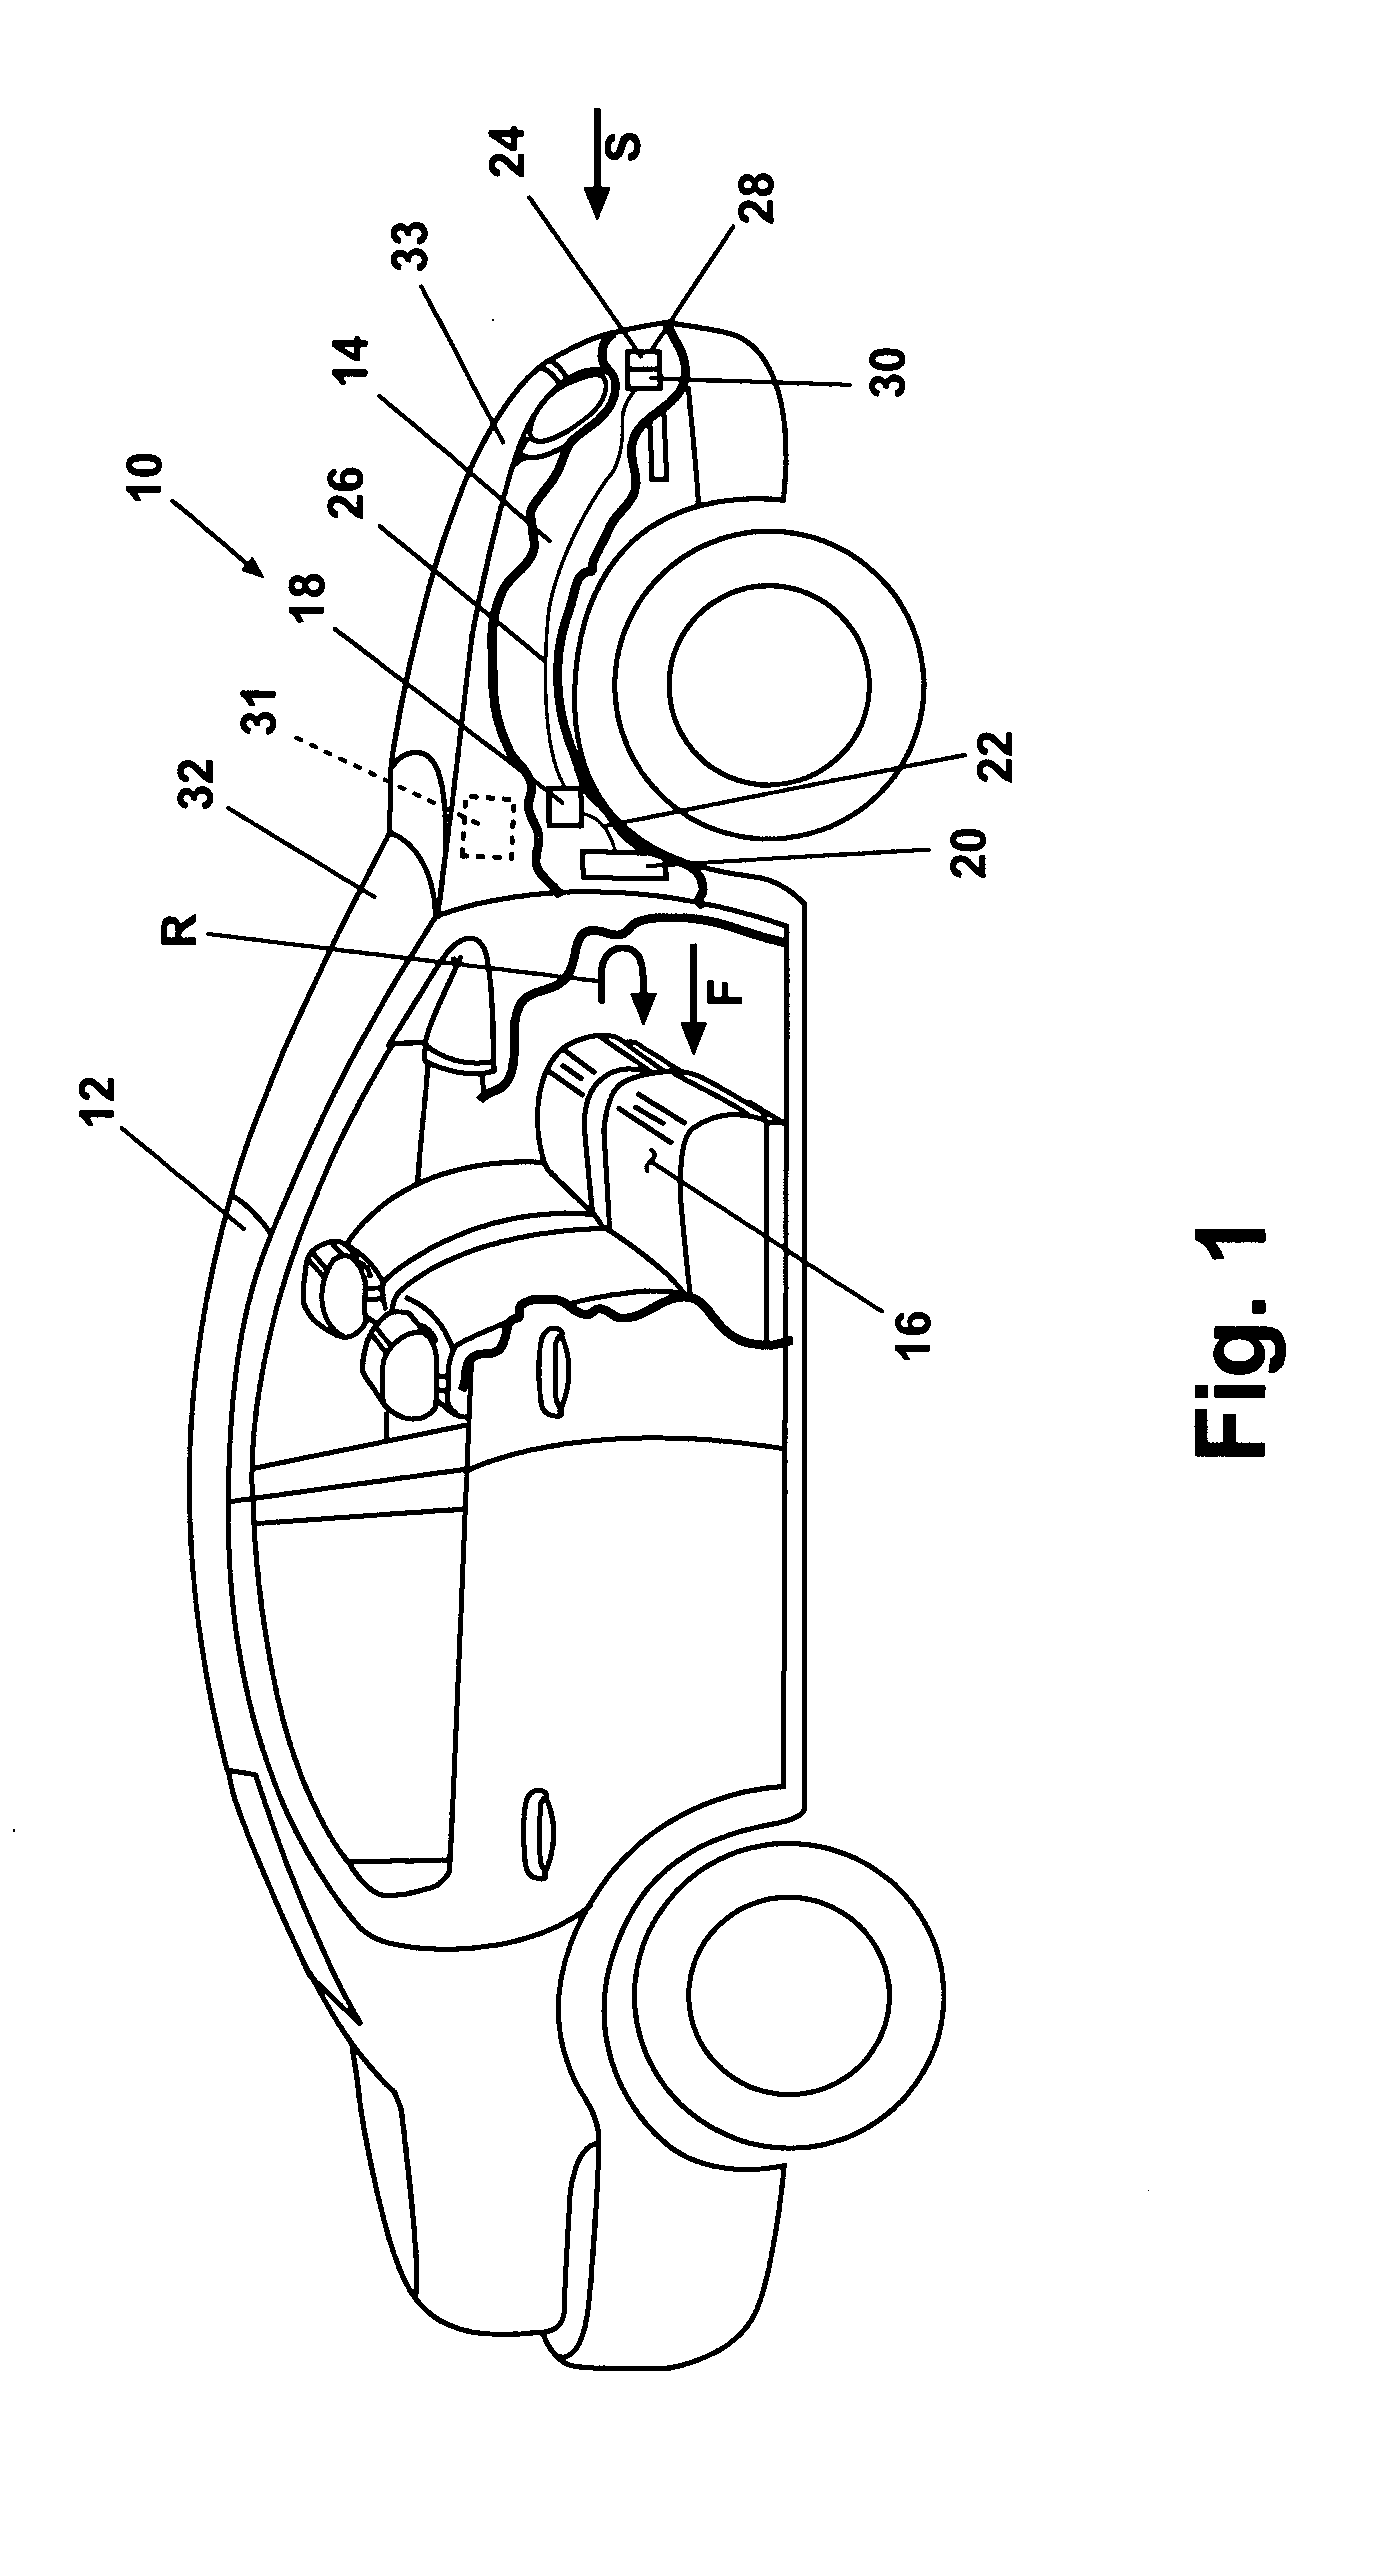 Method of controlling air intake into air conditioned enclosure